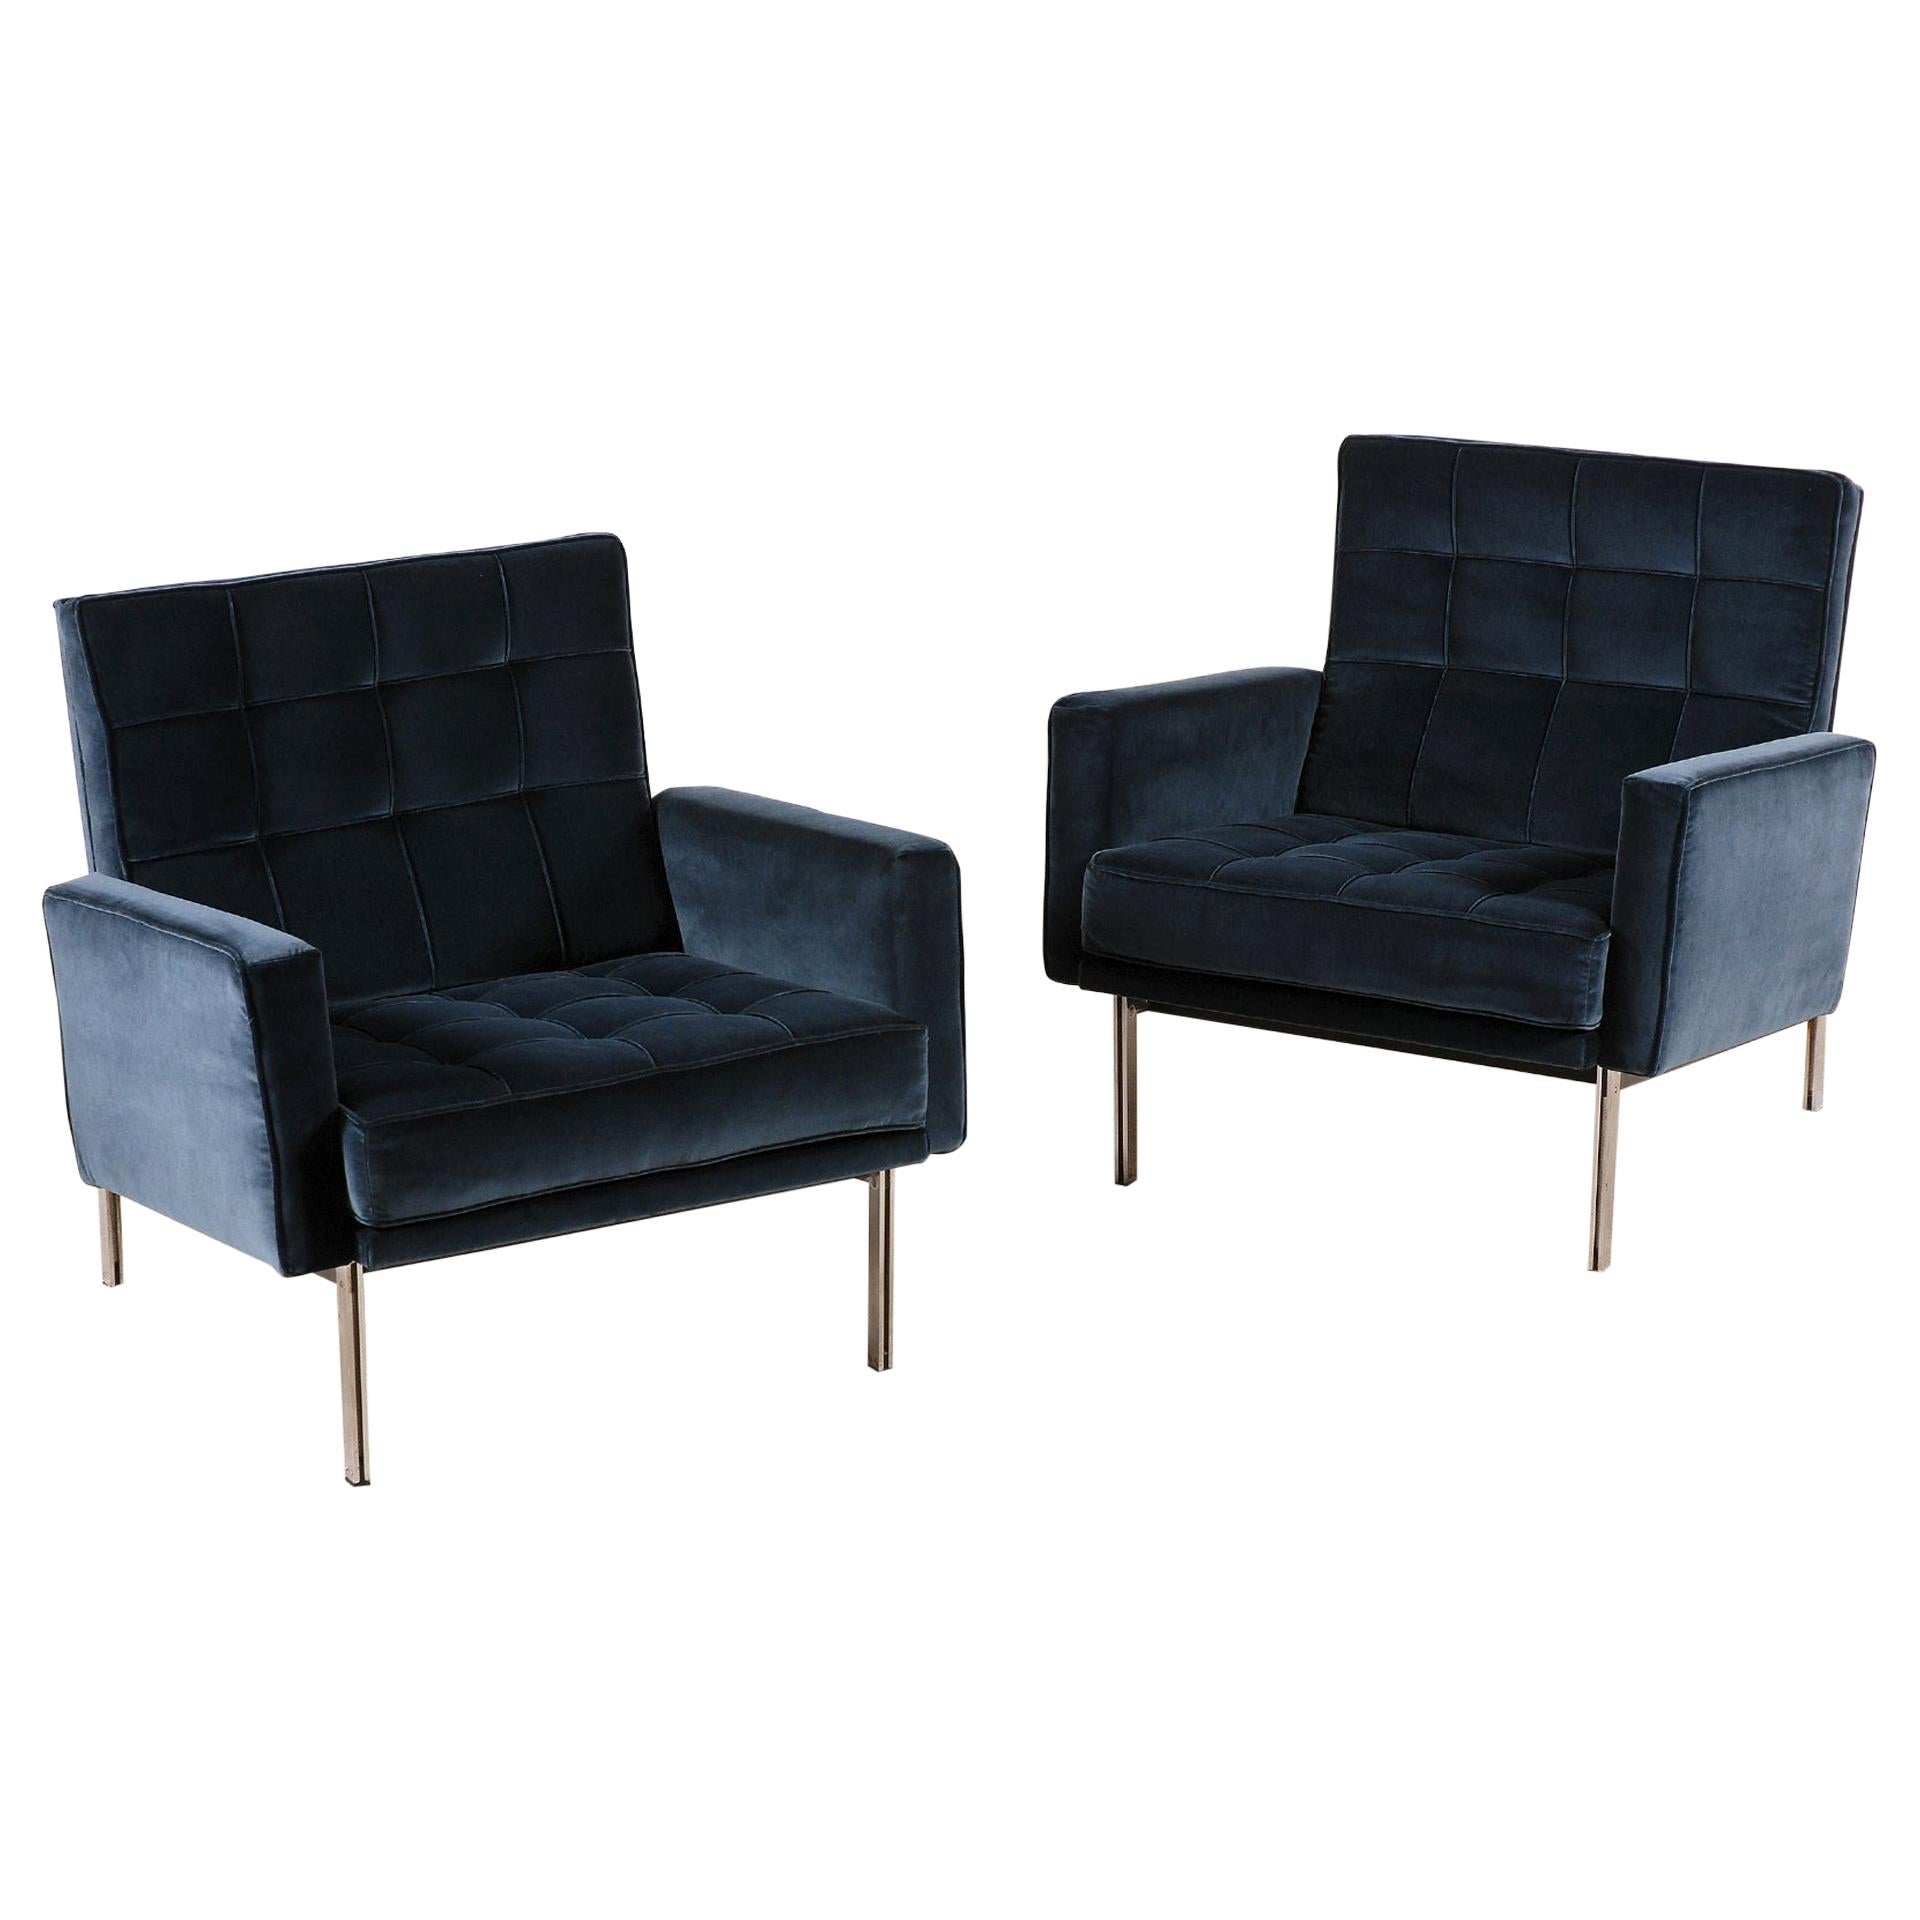 Florence Knoll, Pair of "Parallel Bar" Lounge Chairs, circa 1965